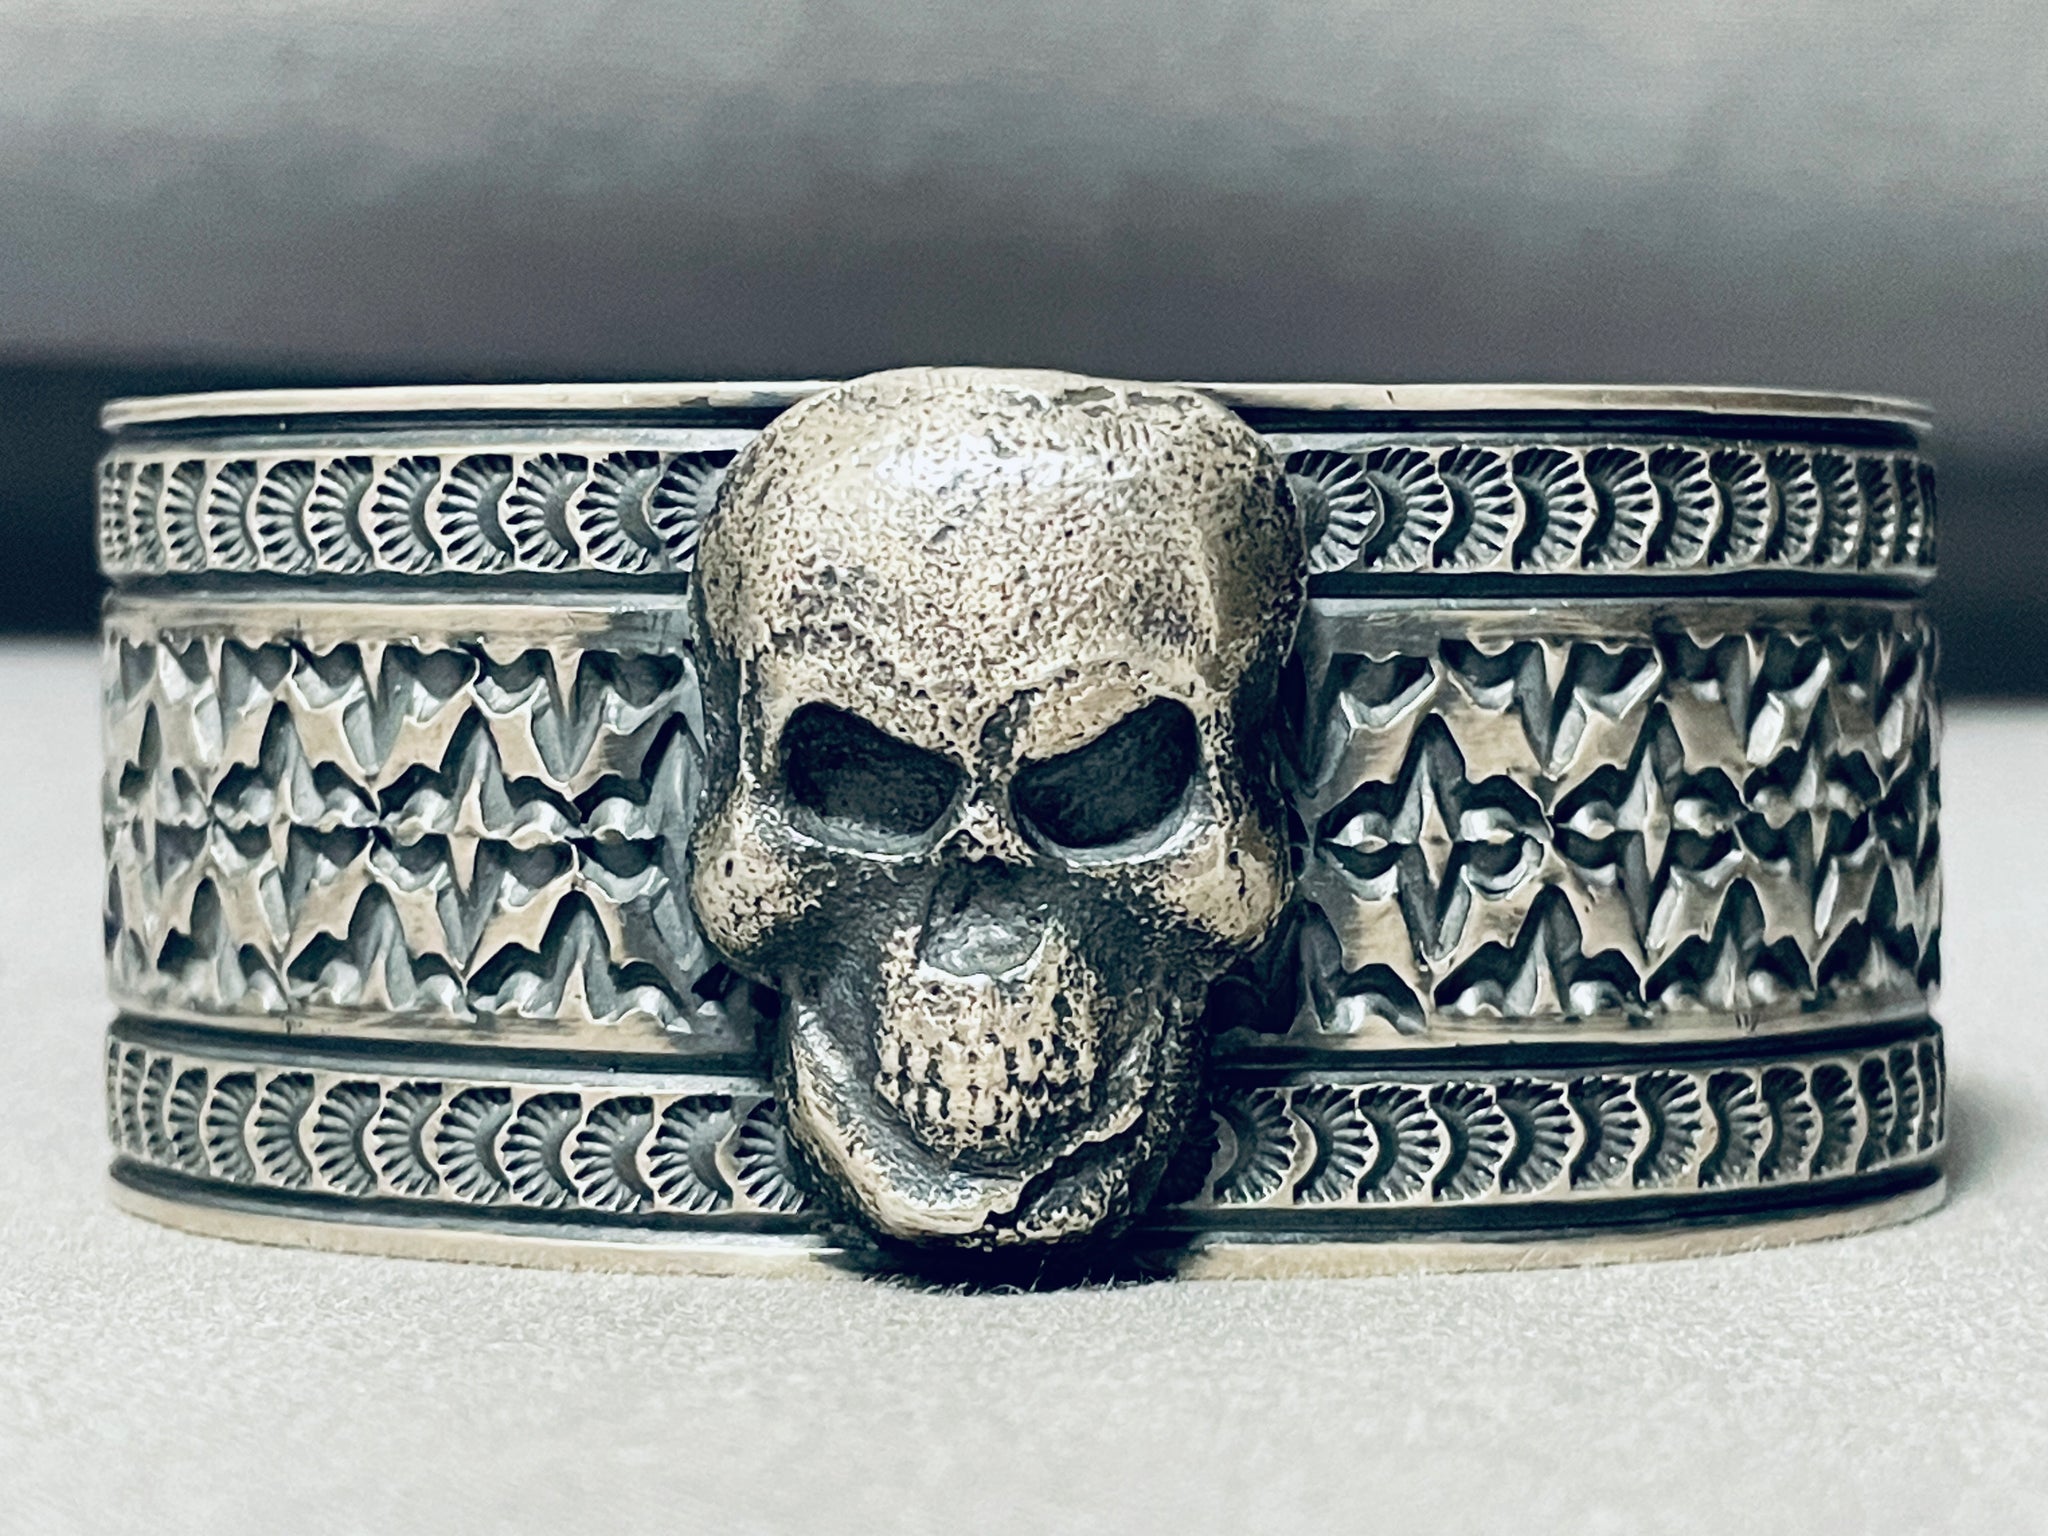 50 Antique Silver Tone Pave Skull Skull Beads With Perfect For European  Bracelet Jewelry And Paracord Accessories From Isabelye, $15.33